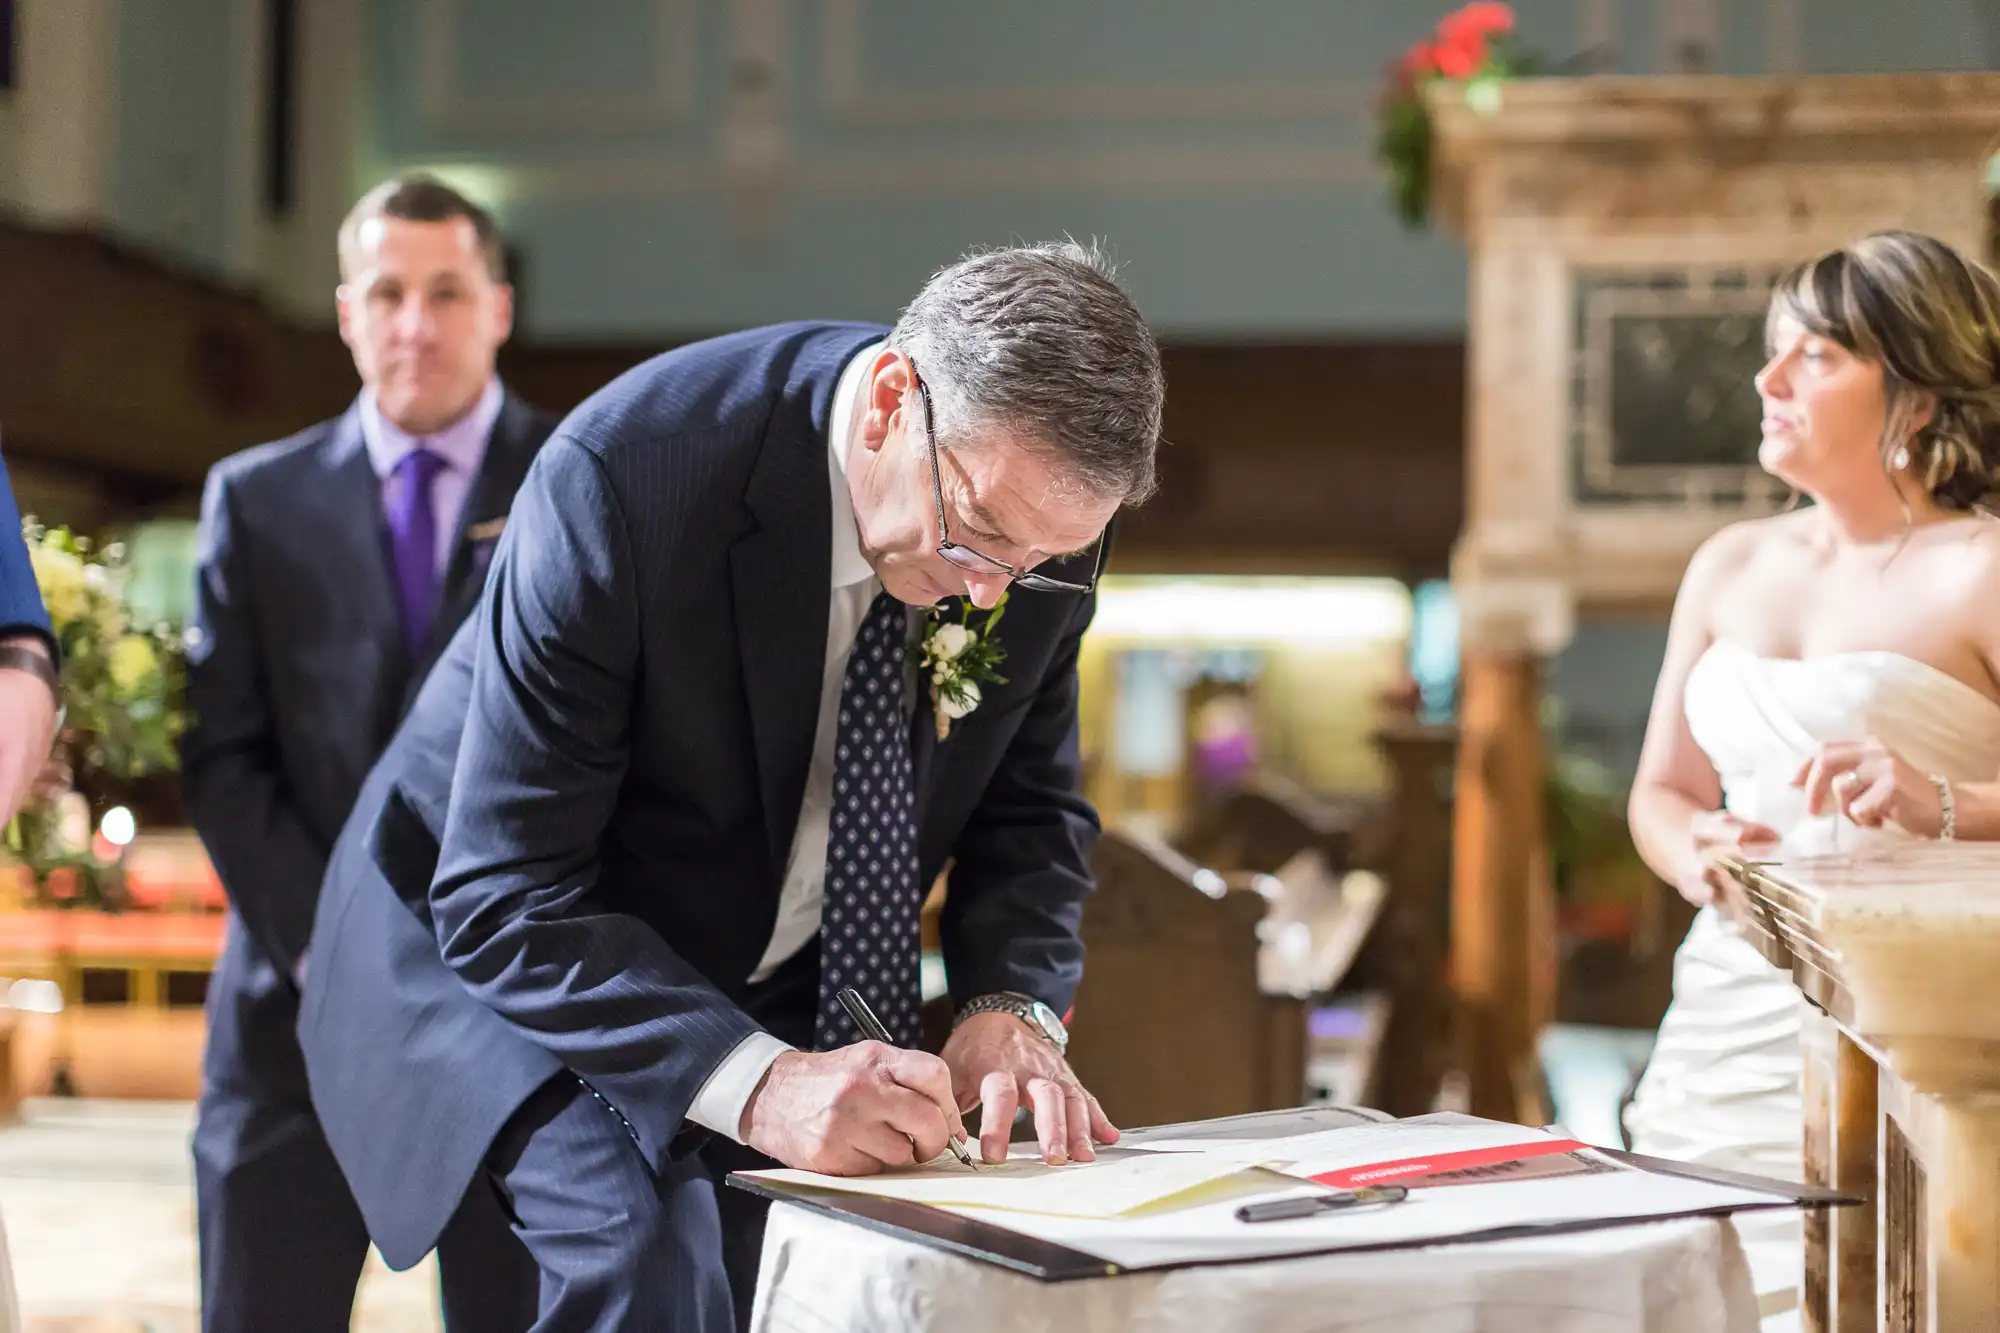 An older man signs a document at a wedding ceremony, watched by a man in a suit and a woman in a wedding dress.